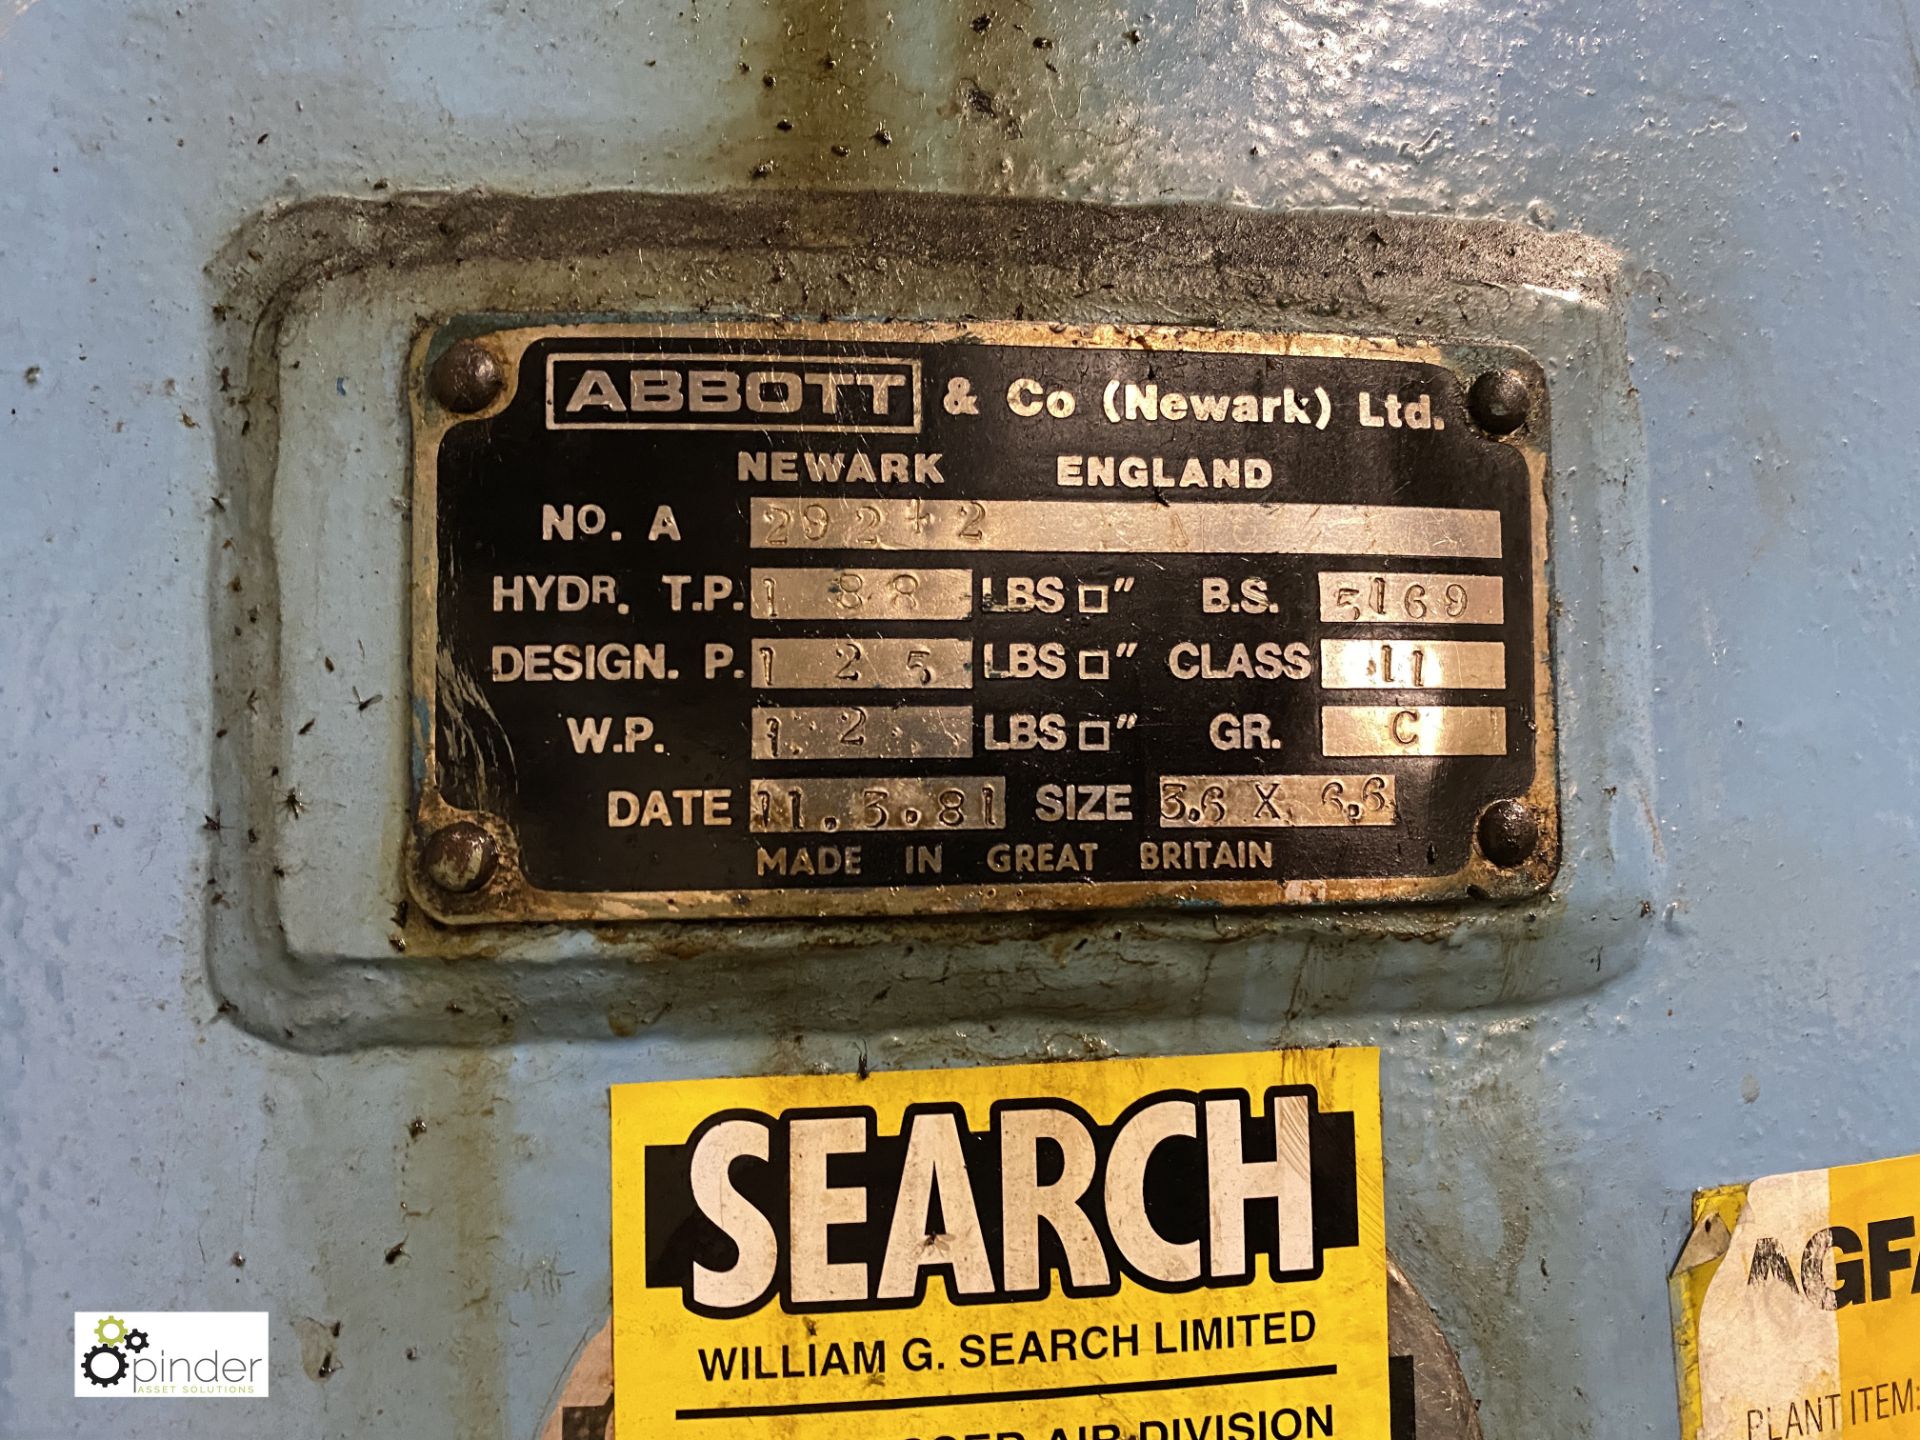 Abbott vertical Air Receiver, serial number A29212 - Image 2 of 3